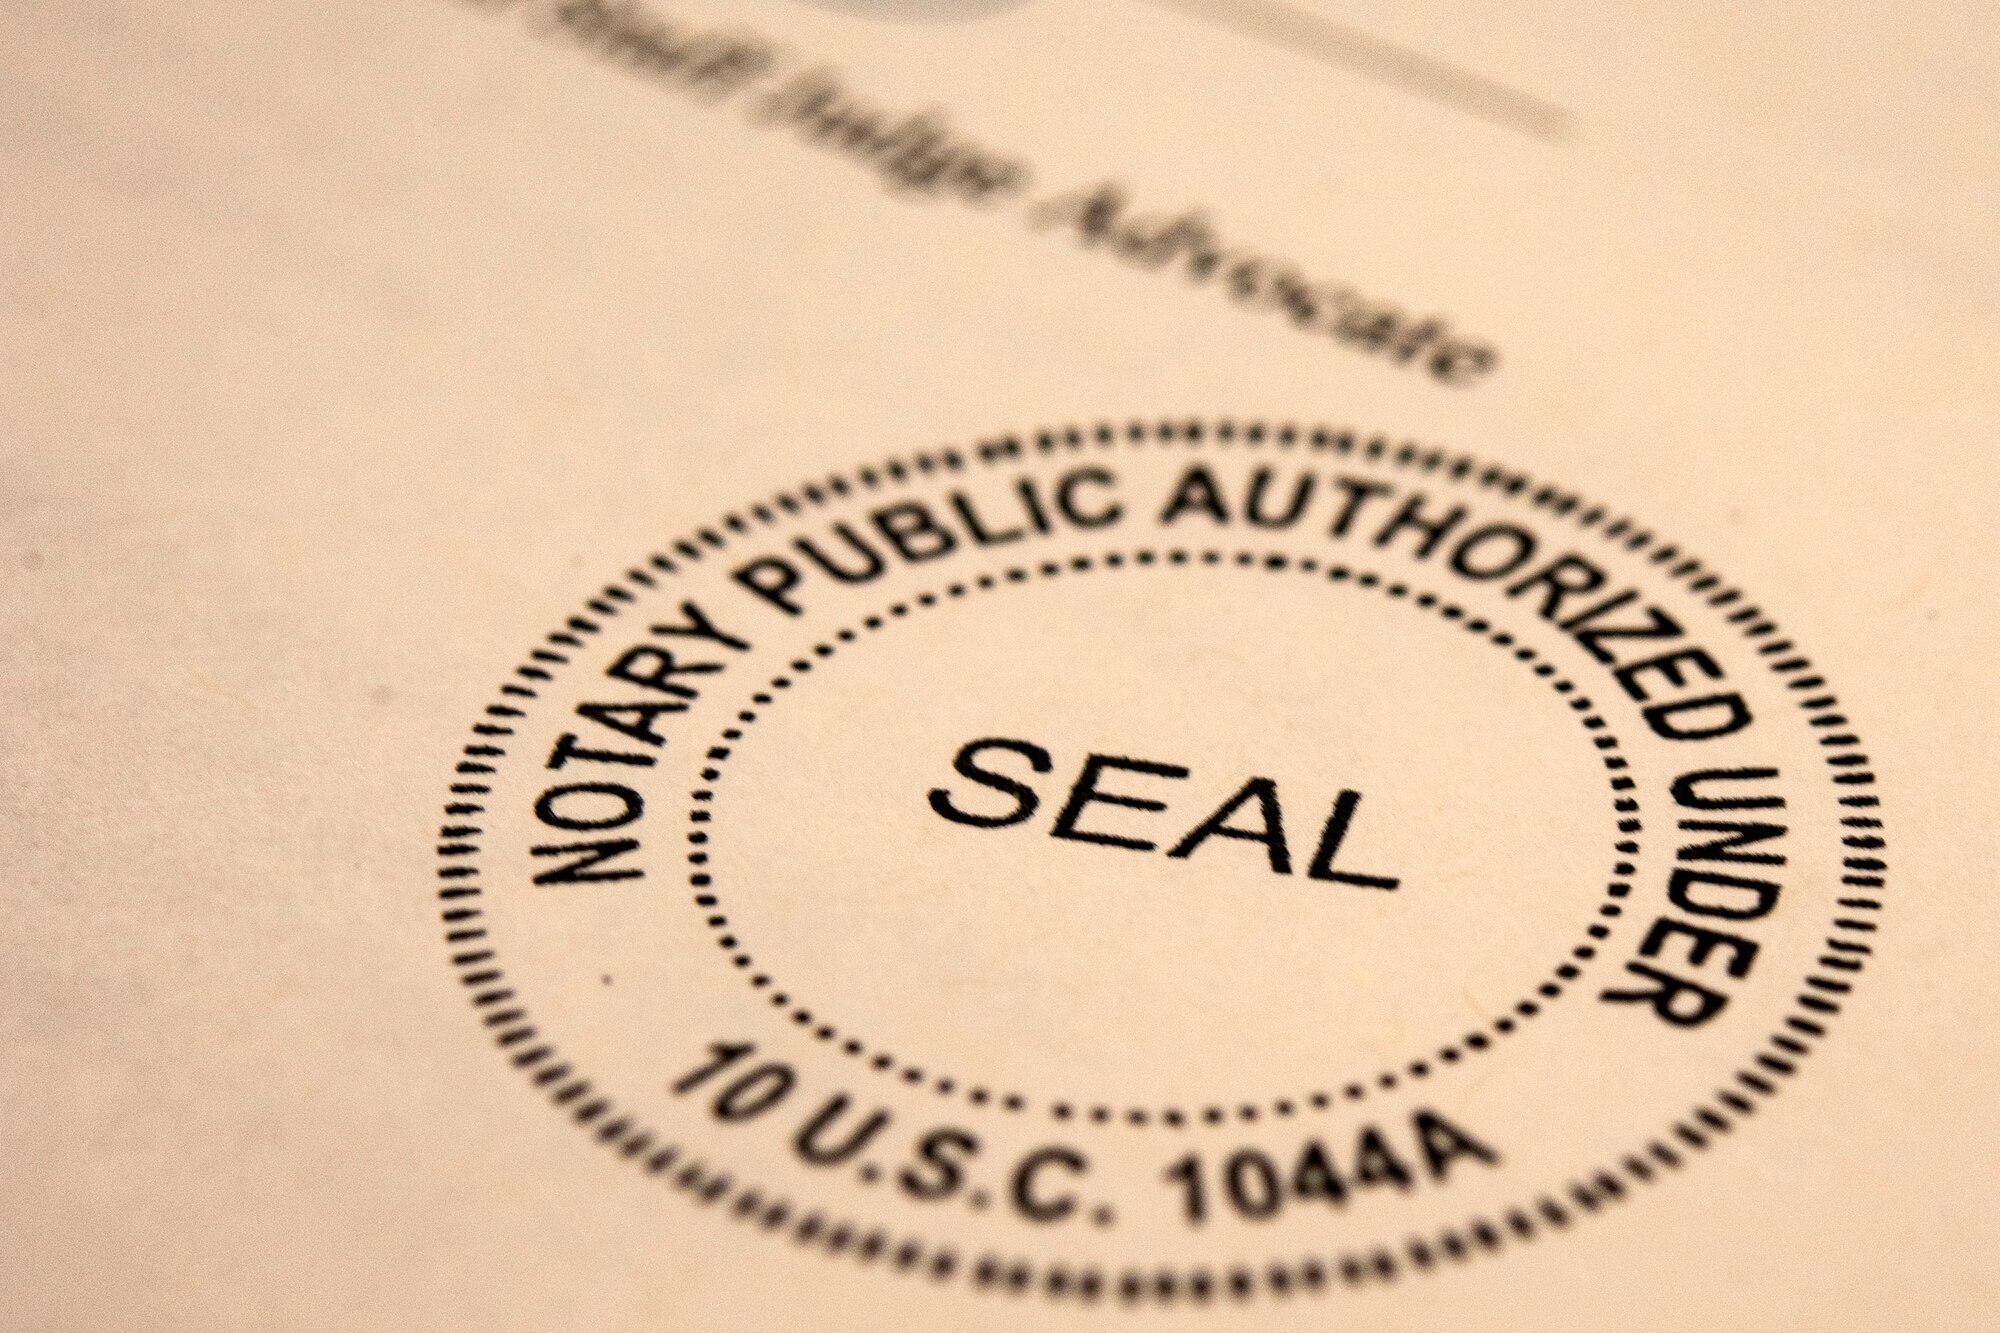 A federal notary seal signifies official completion of a will Oct. 8, 2019, at Moody Air Force Base, Ga. The judge advocate office regularly aids retirees and military members with wills on Tuesdays. This free legal assistance provides personal and financial relief for customers and enables Airman readiness. (U.S. Air Force photo by Senior Airman Erick Requadt)